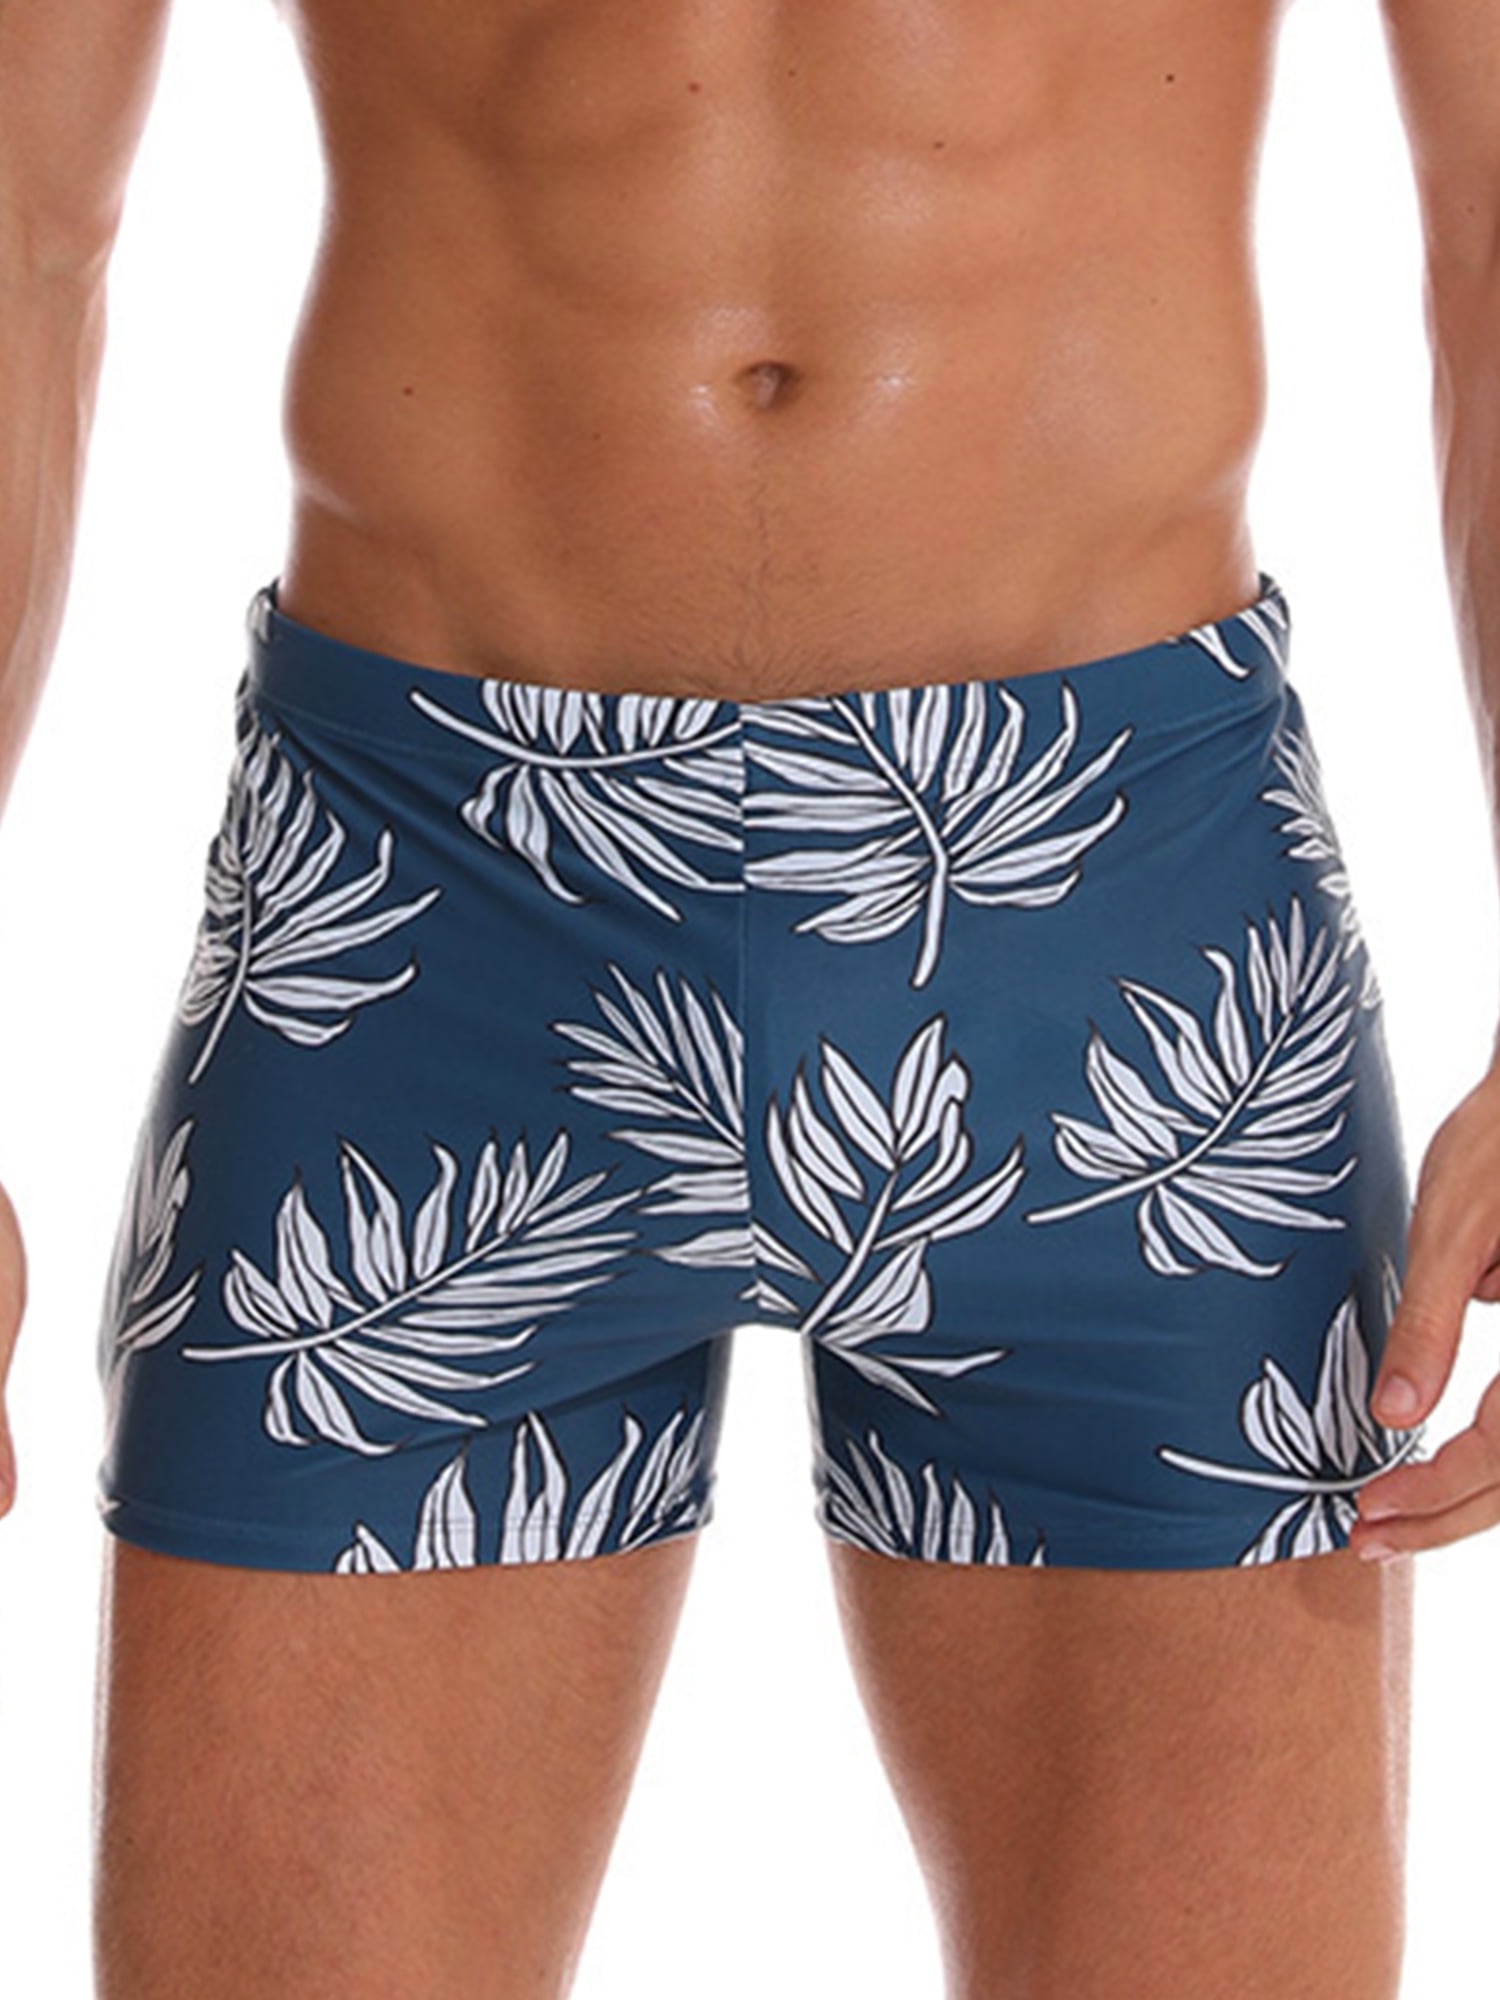 Sexy Dance Casual Mens Swim Trunks Board Shorts Bathing Suits Elastic